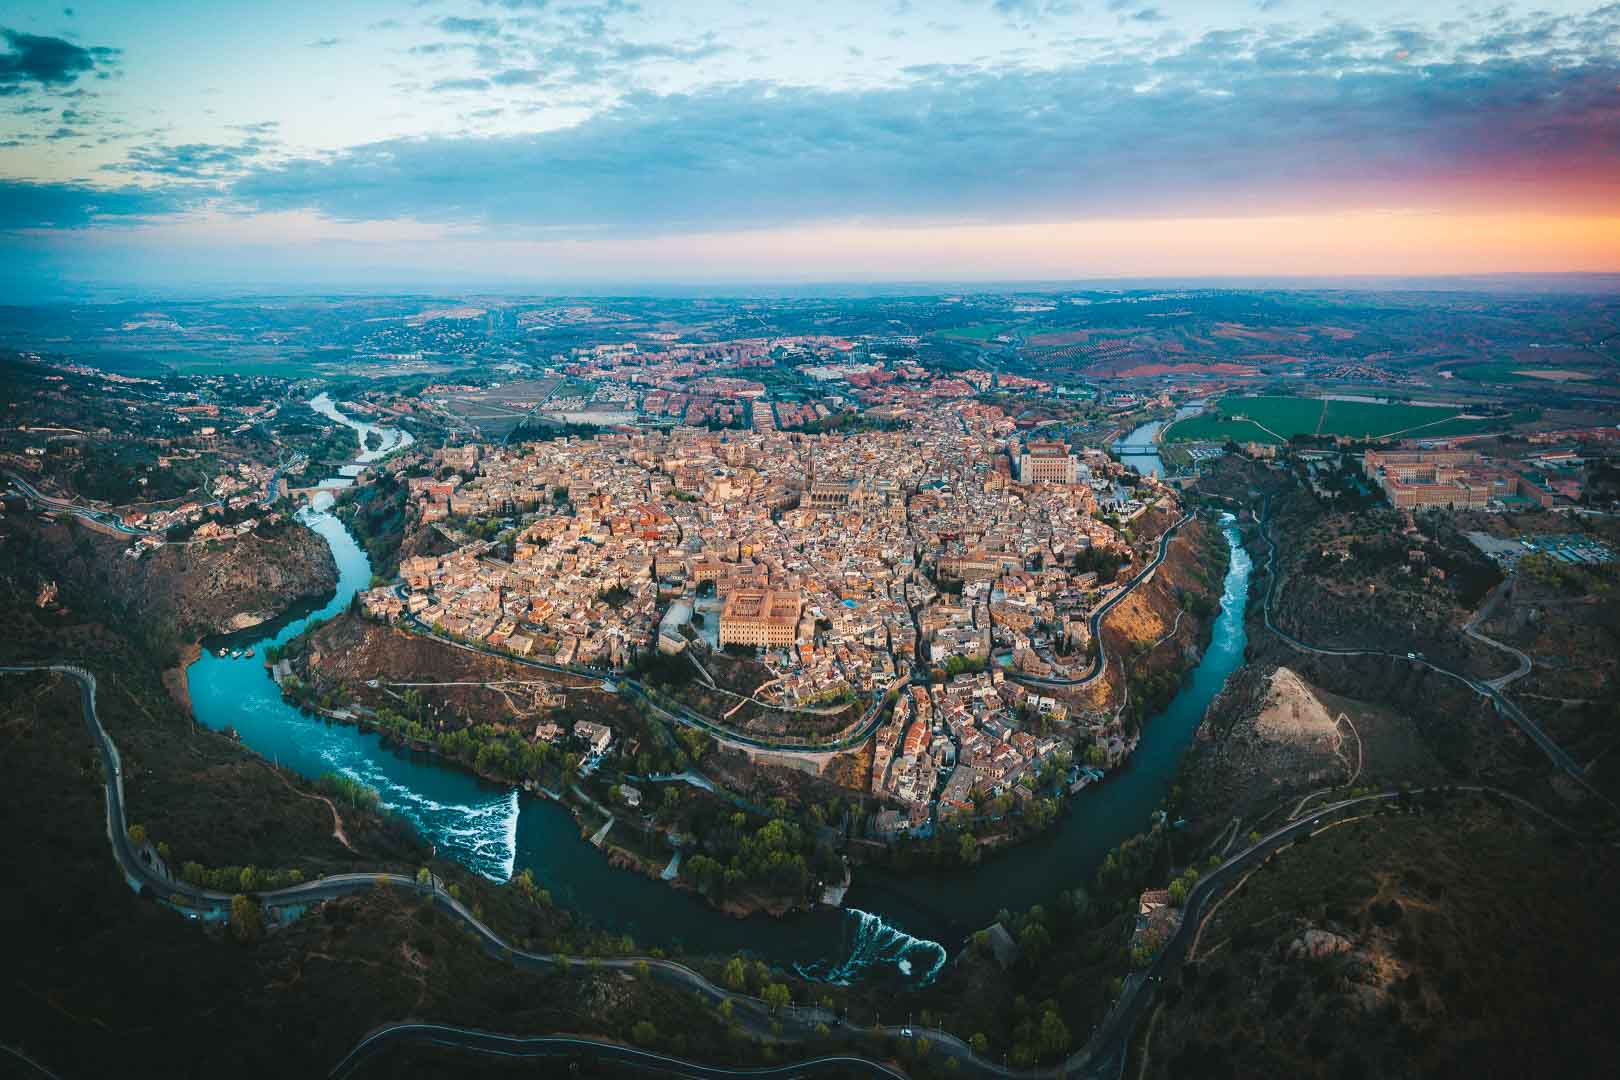 [Ultimate Bucket List] The 27 Best Things to Do in Toledo, Spain